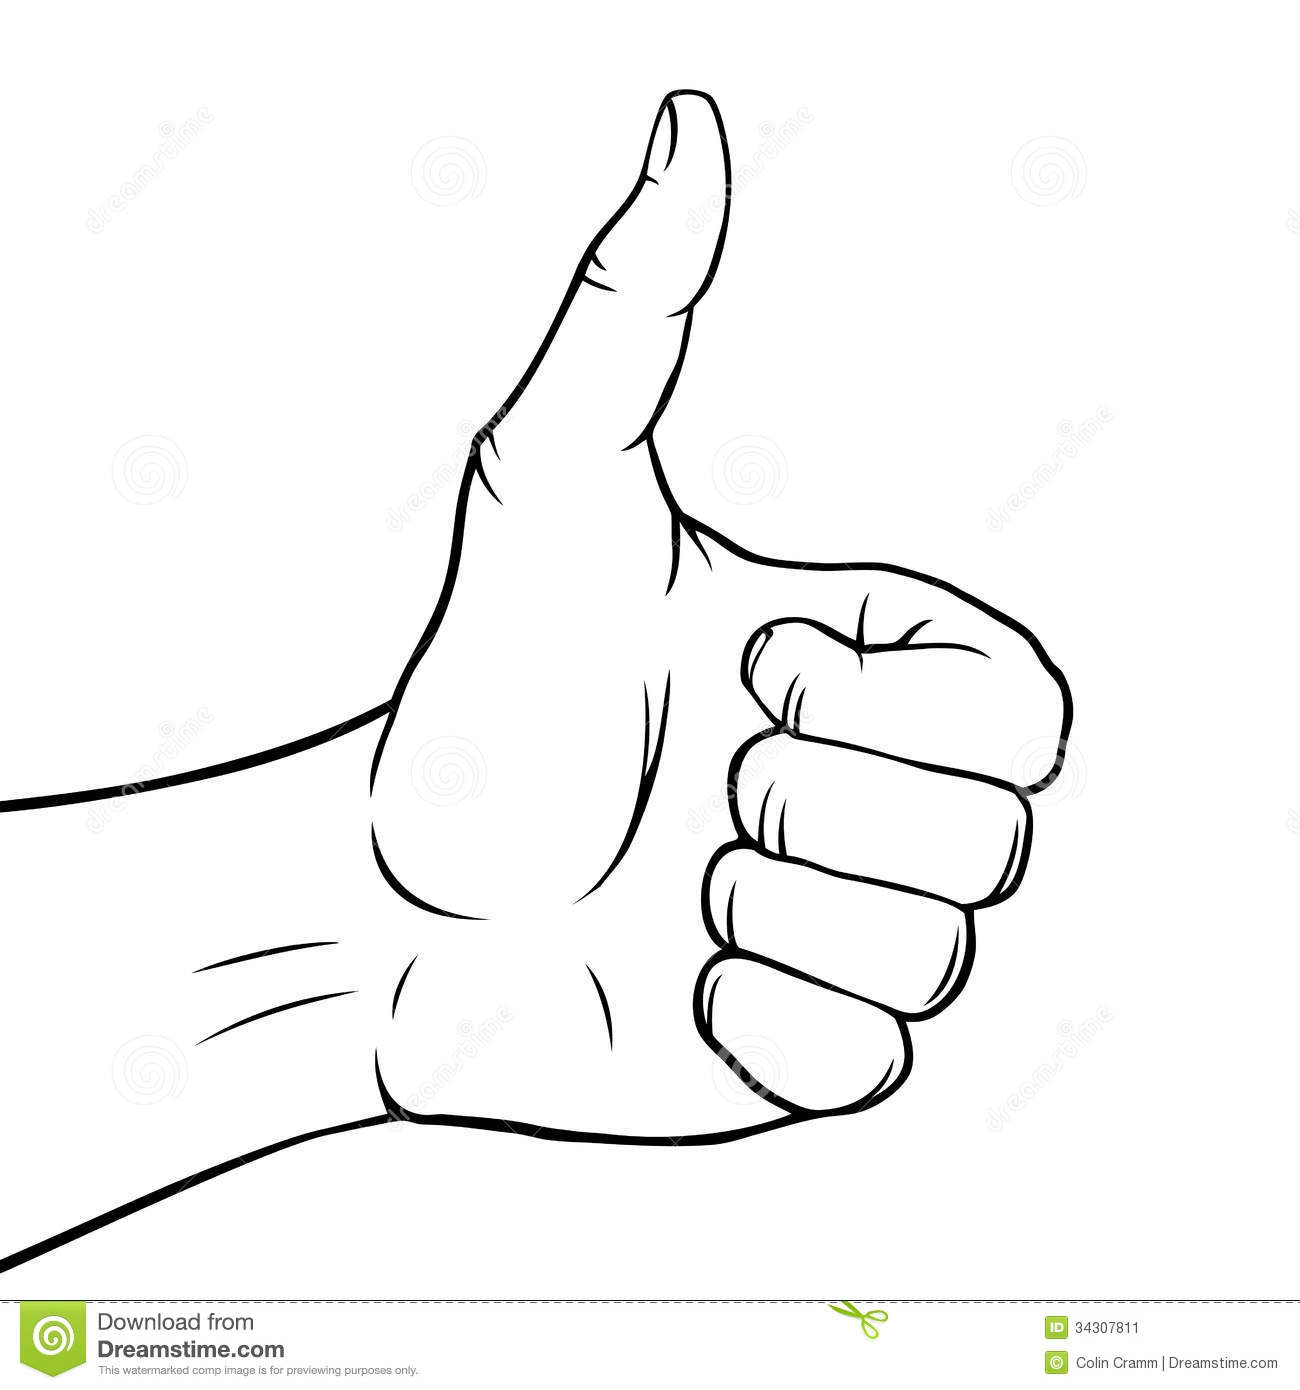 Black And White Thumbs Up Stock Image   Image  34307811